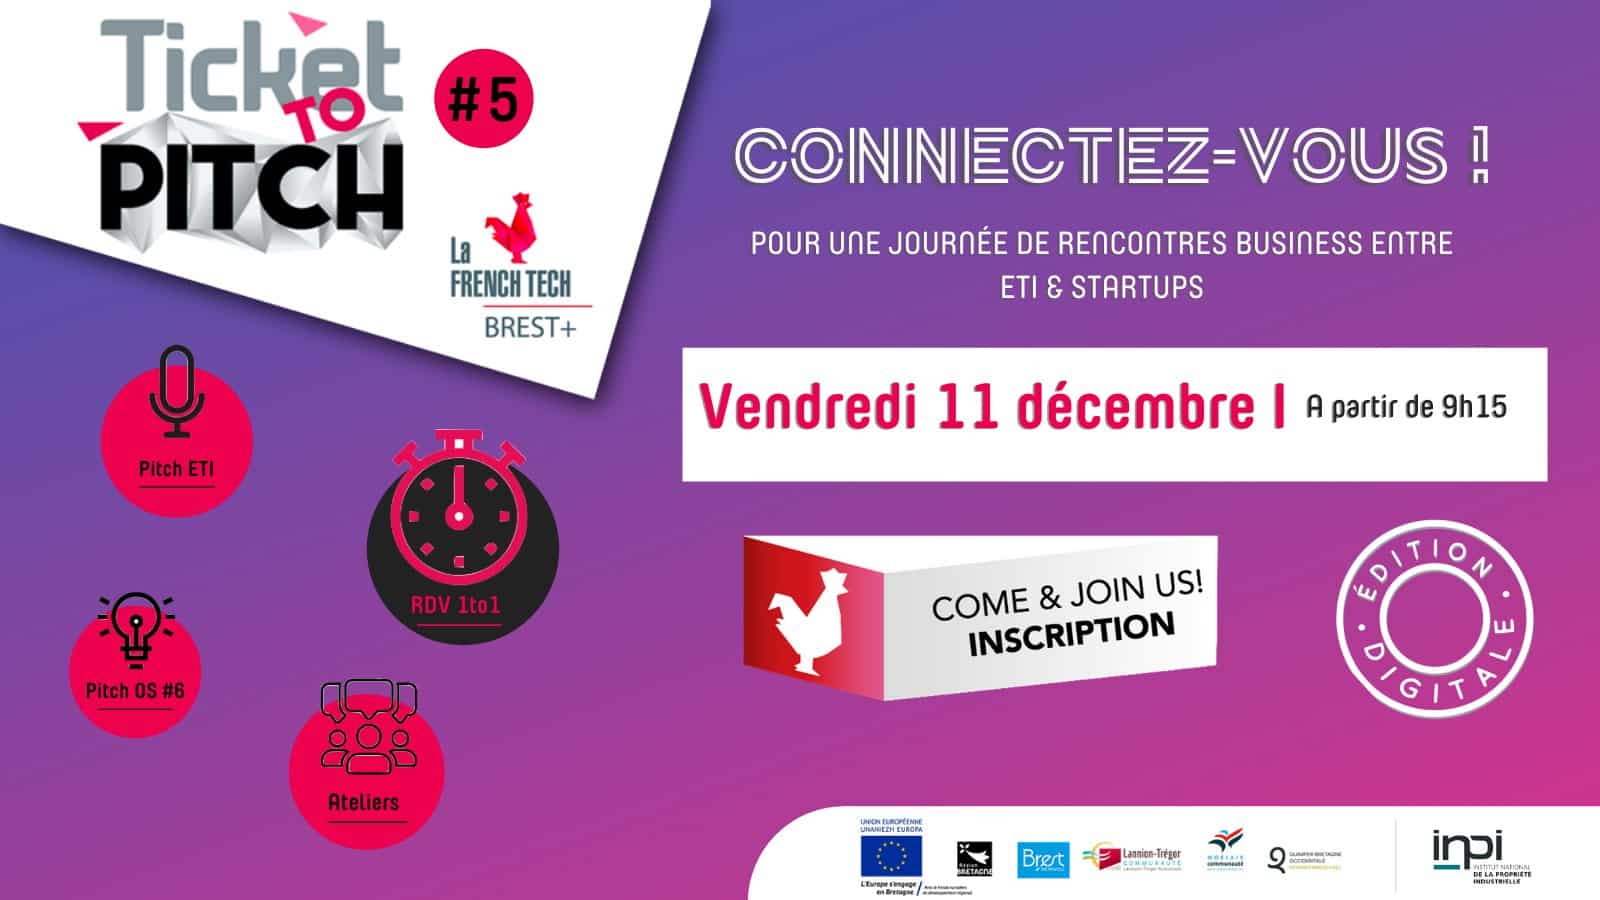 Ticket to pitch n°5